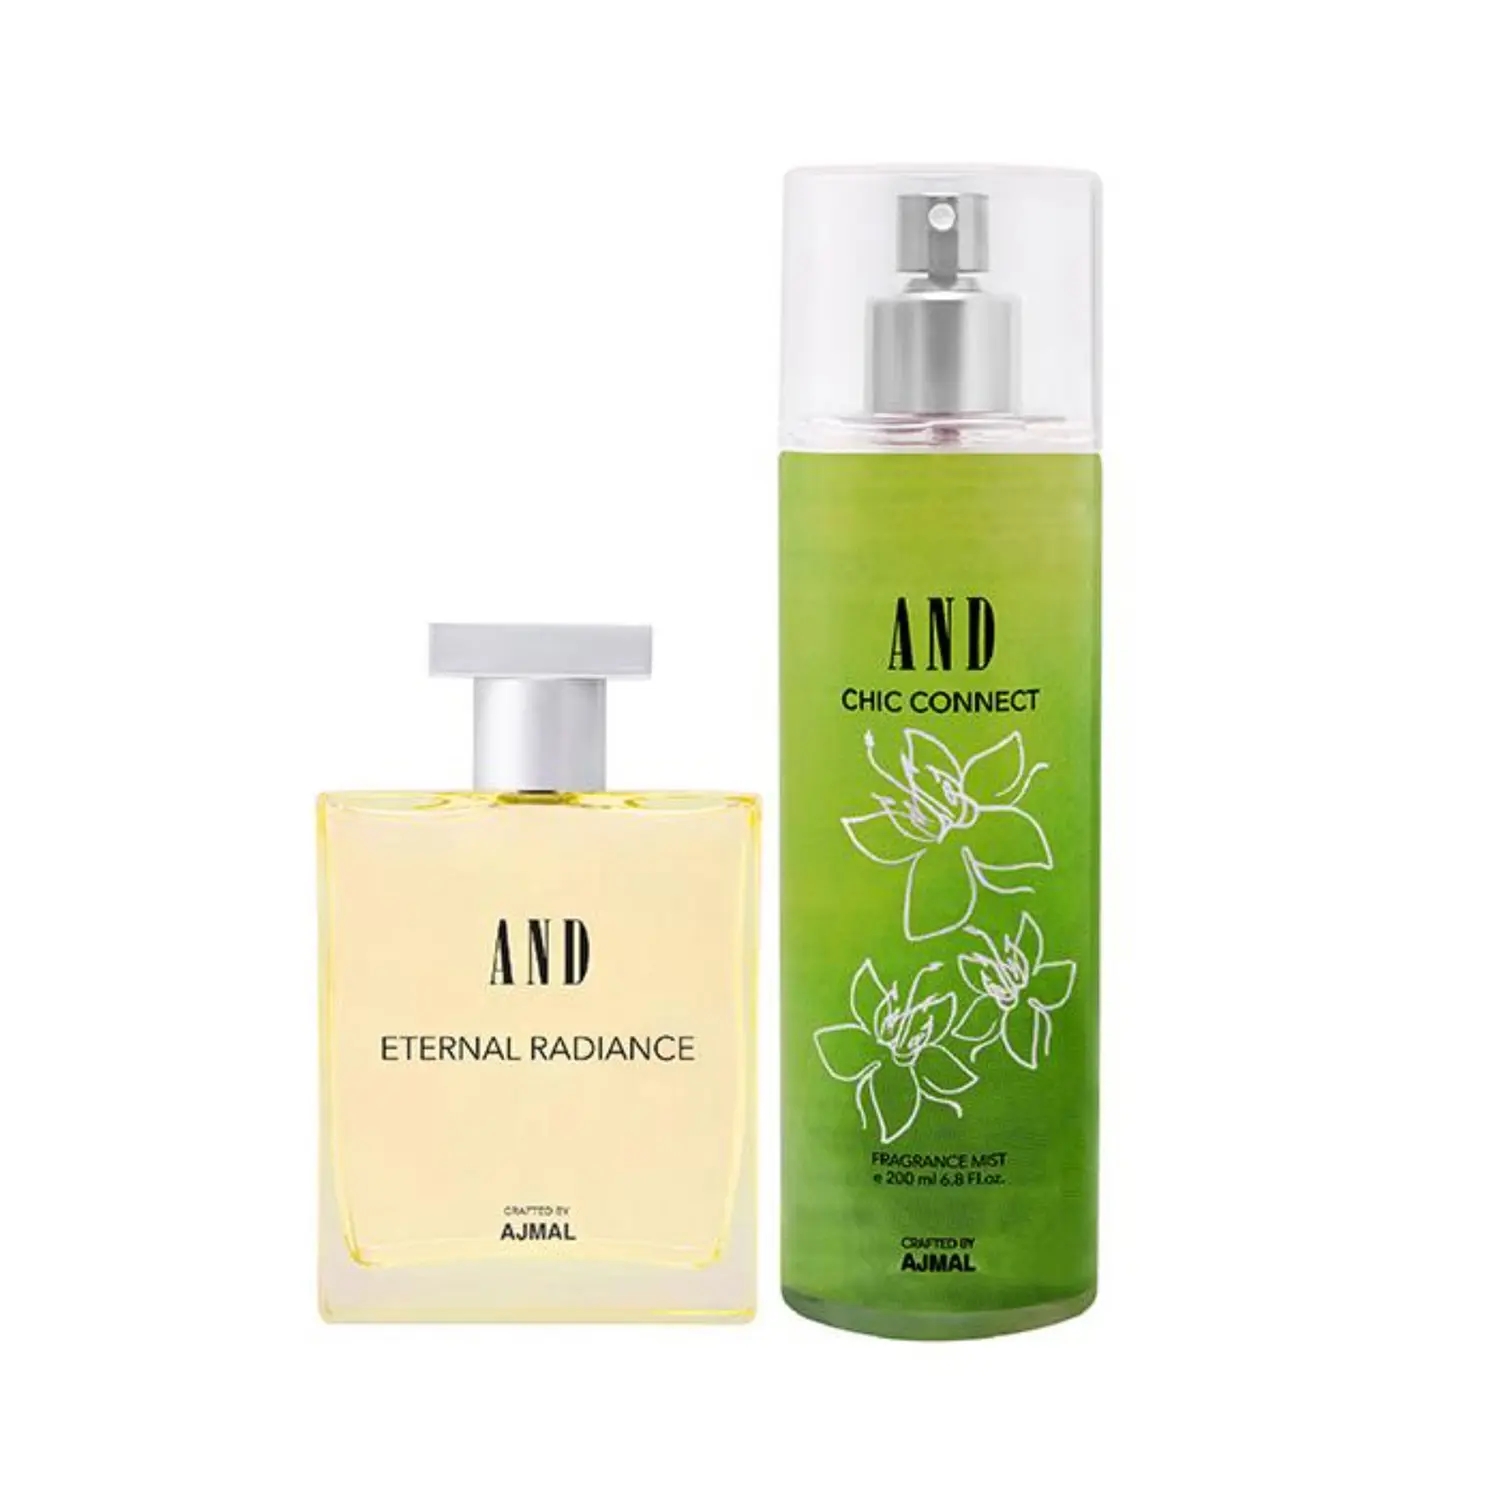 AND | AND Eternal Radiance EDP & Chic Connect Mist - (2Pcs)